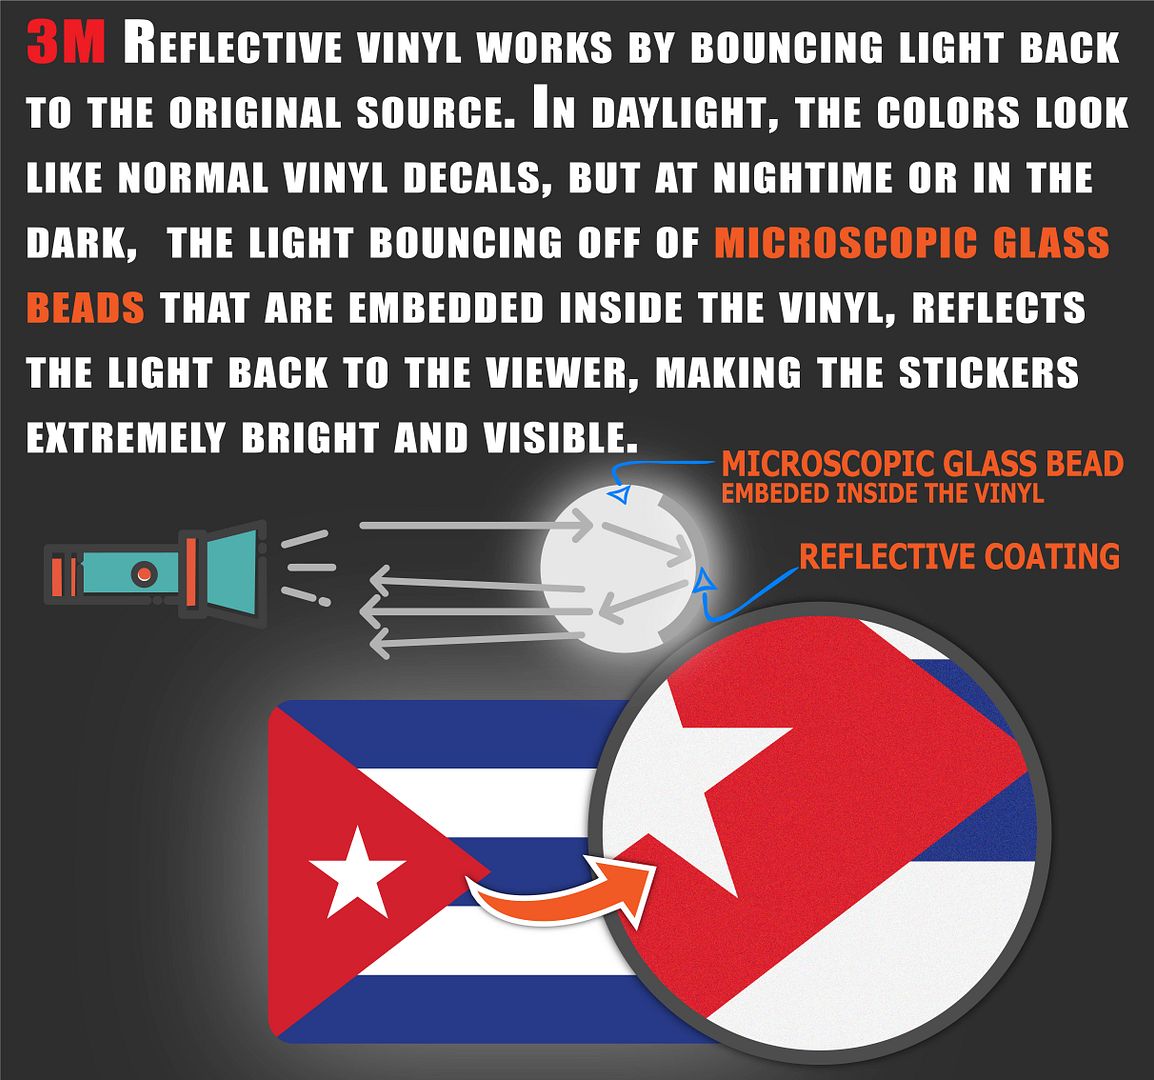 (x3) 3M Reflective Cuba Flag Stickers | Versatile & High Quality Safety Decals | Flag of Cuba Sticker Decals | Perfect for Hard hats, laptops, bikes, toolboxes and more! - image 3 of 3